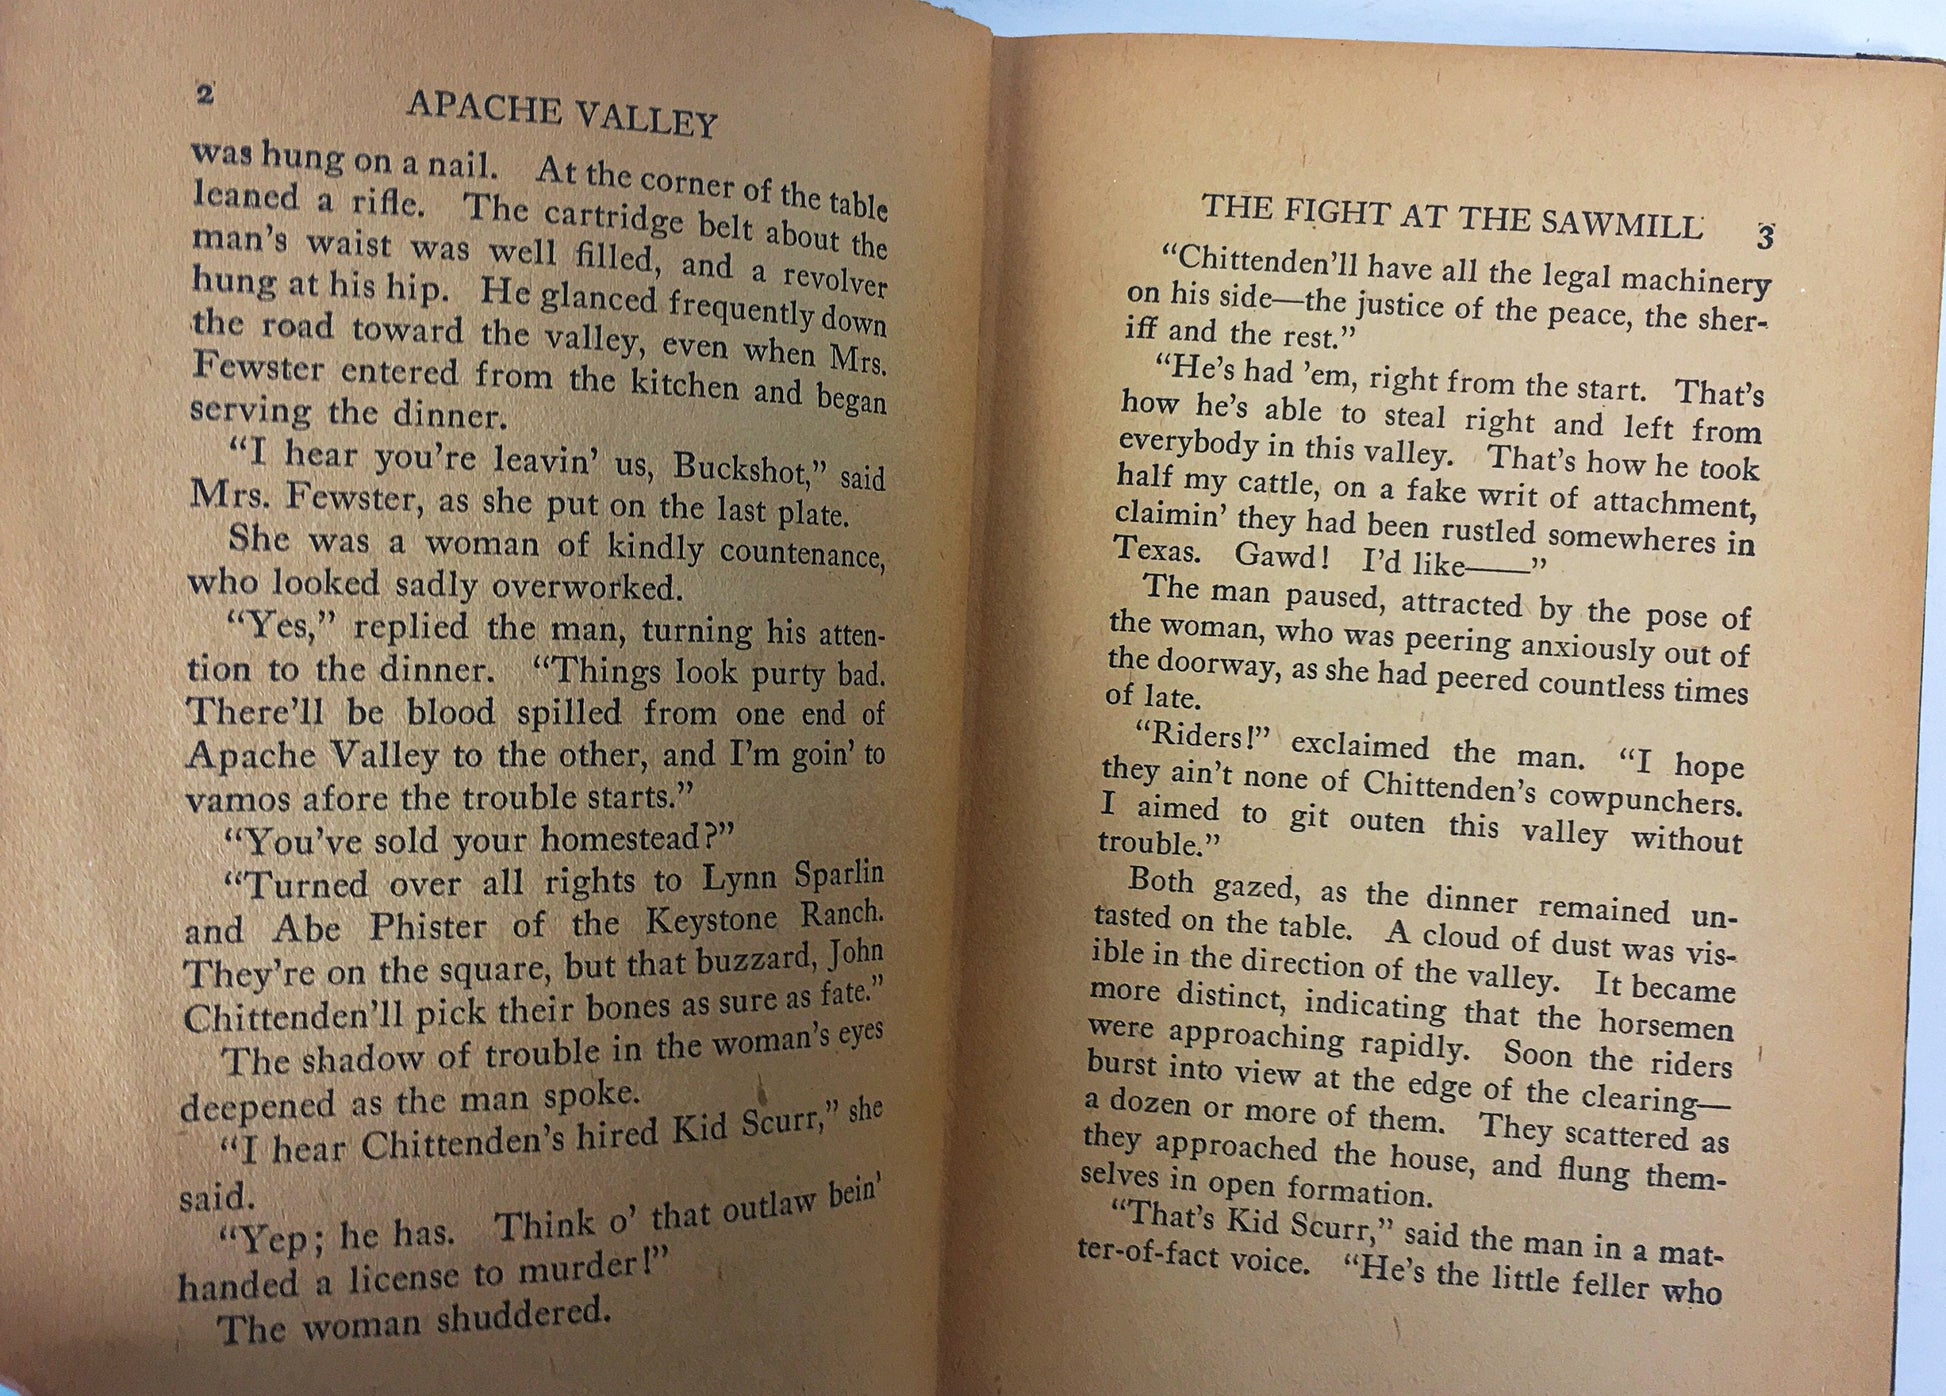 Apache Valley by Arthur Chapman. Vintage pulp western book circa 1925 about a cattle war in the southwest, terror & blood feud. Brown decor